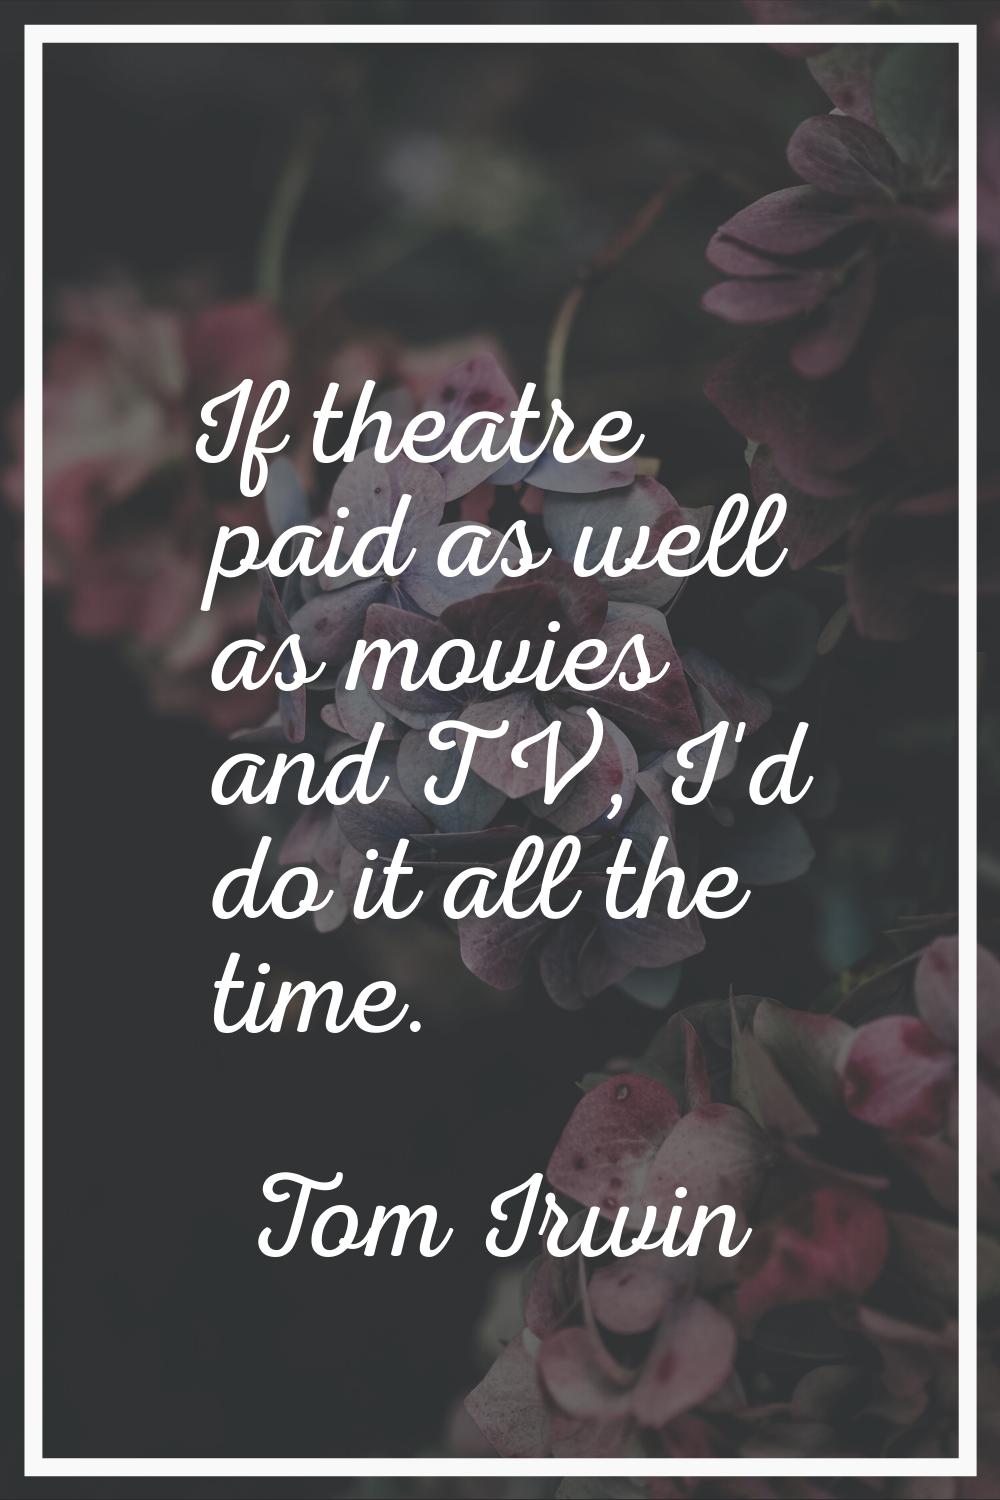 If theatre paid as well as movies and TV, I'd do it all the time.